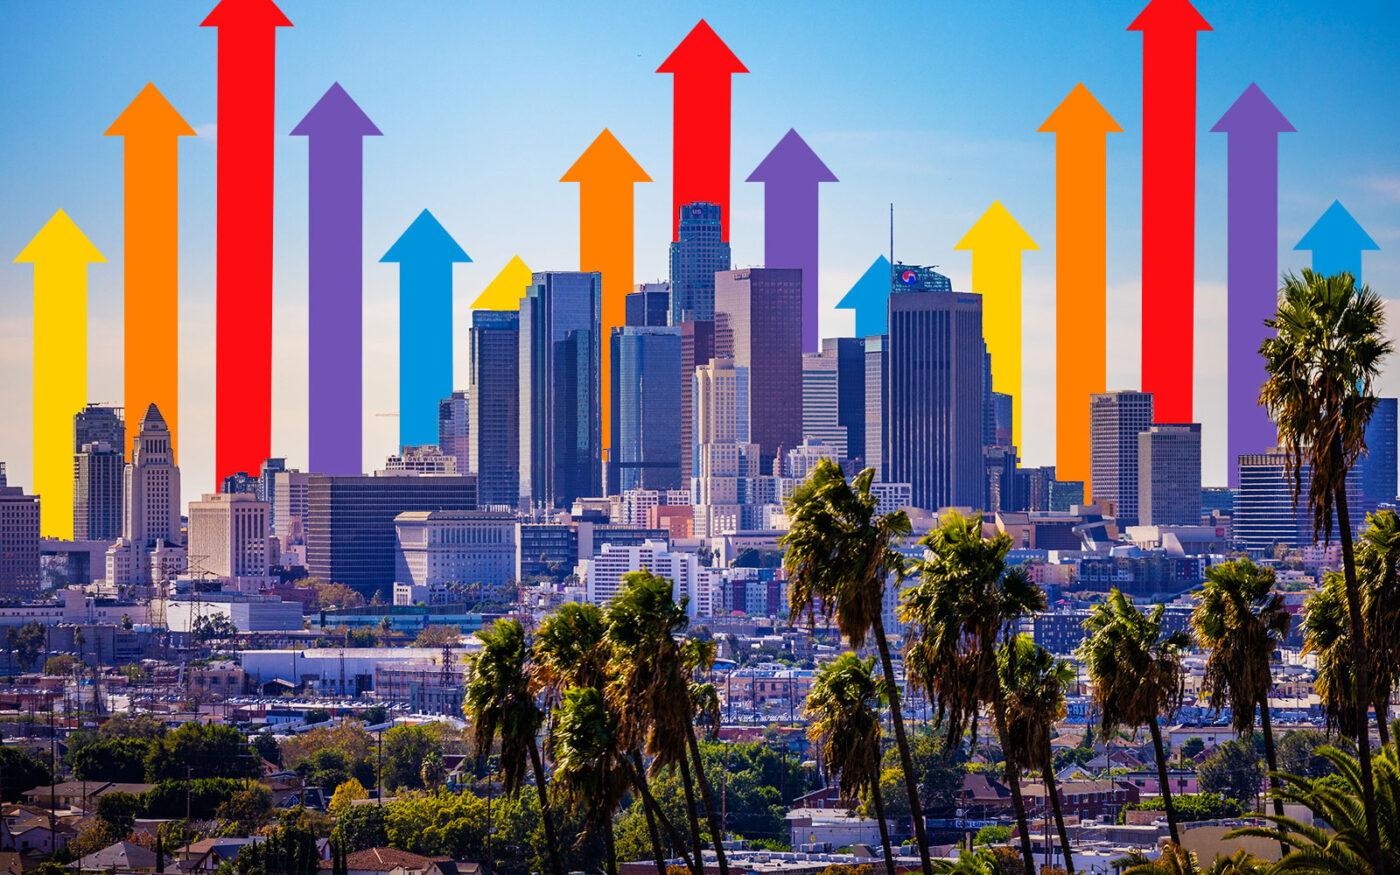 SoCal home prices shoot up 7% in November: CoreLogic